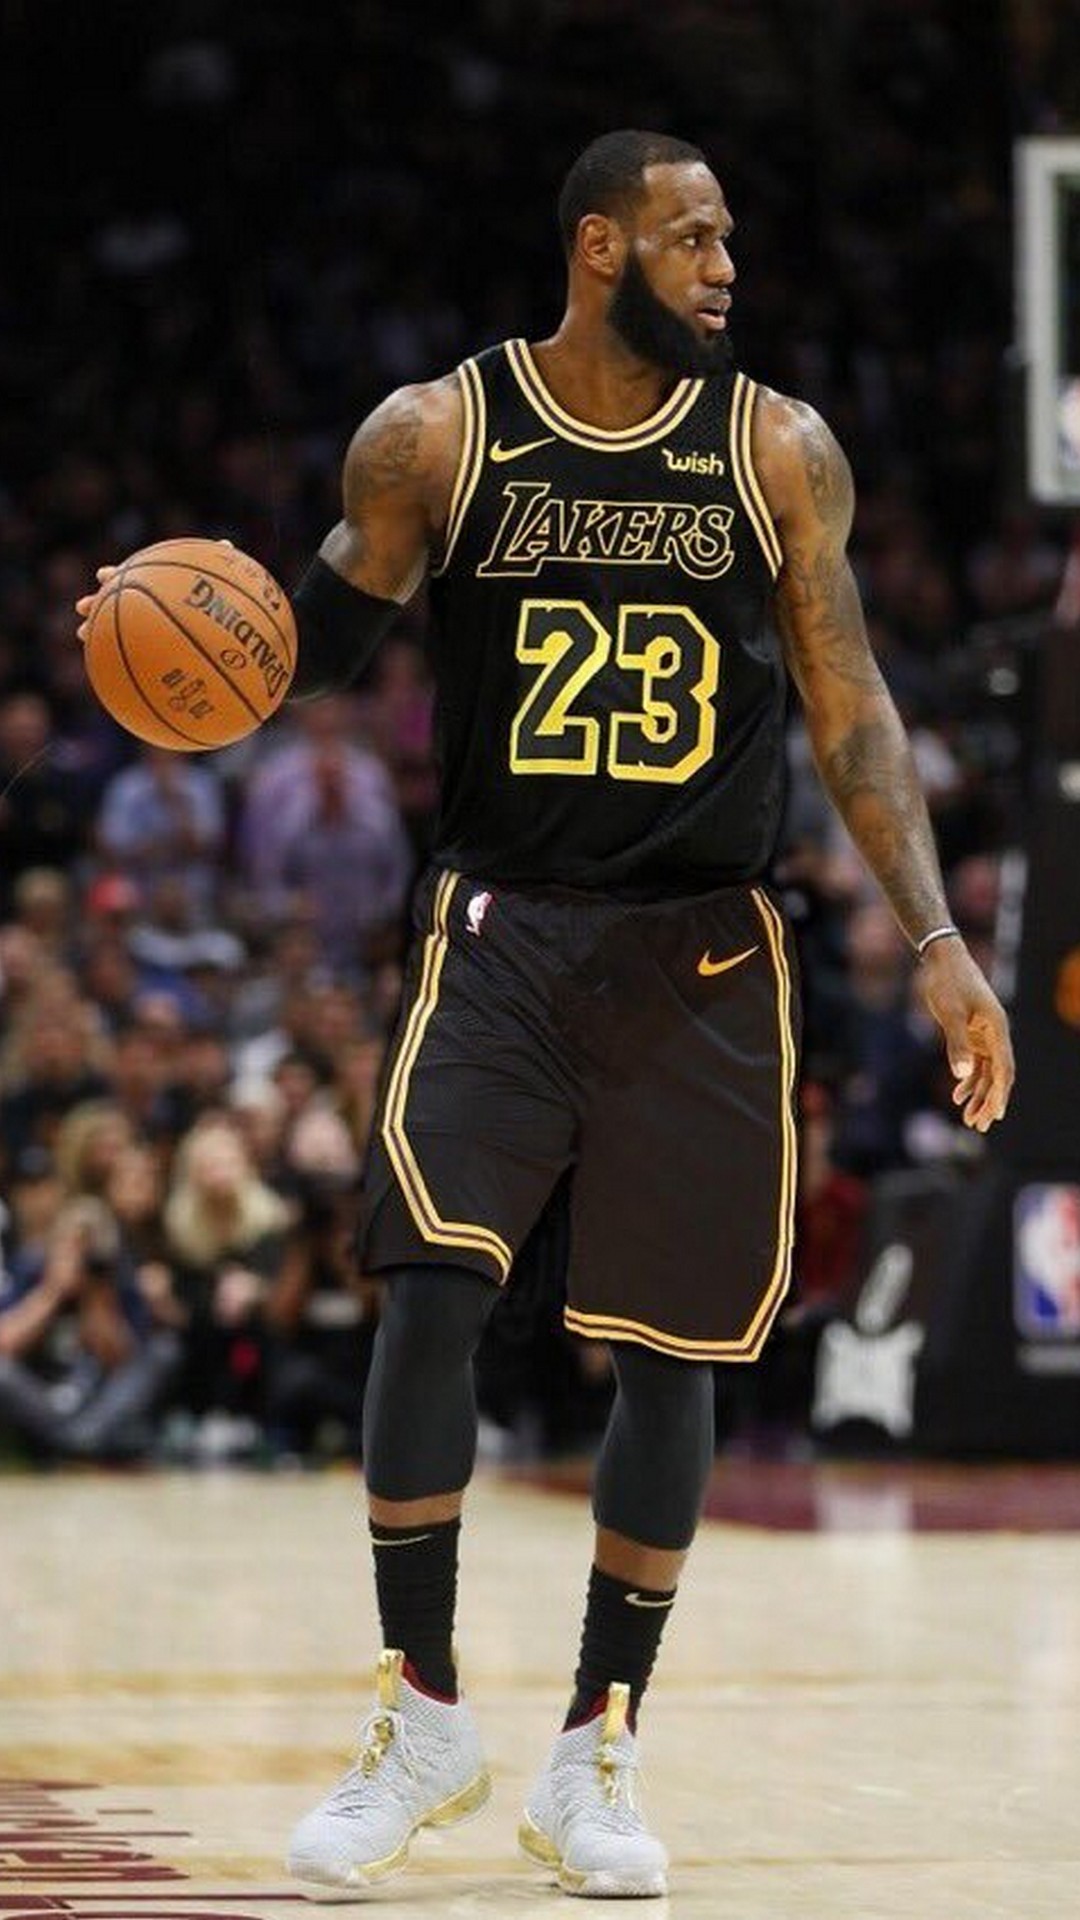 Lebron James La Lakers IPhone 6 Wallpaper With High Resolution James Lakers Black Jersey